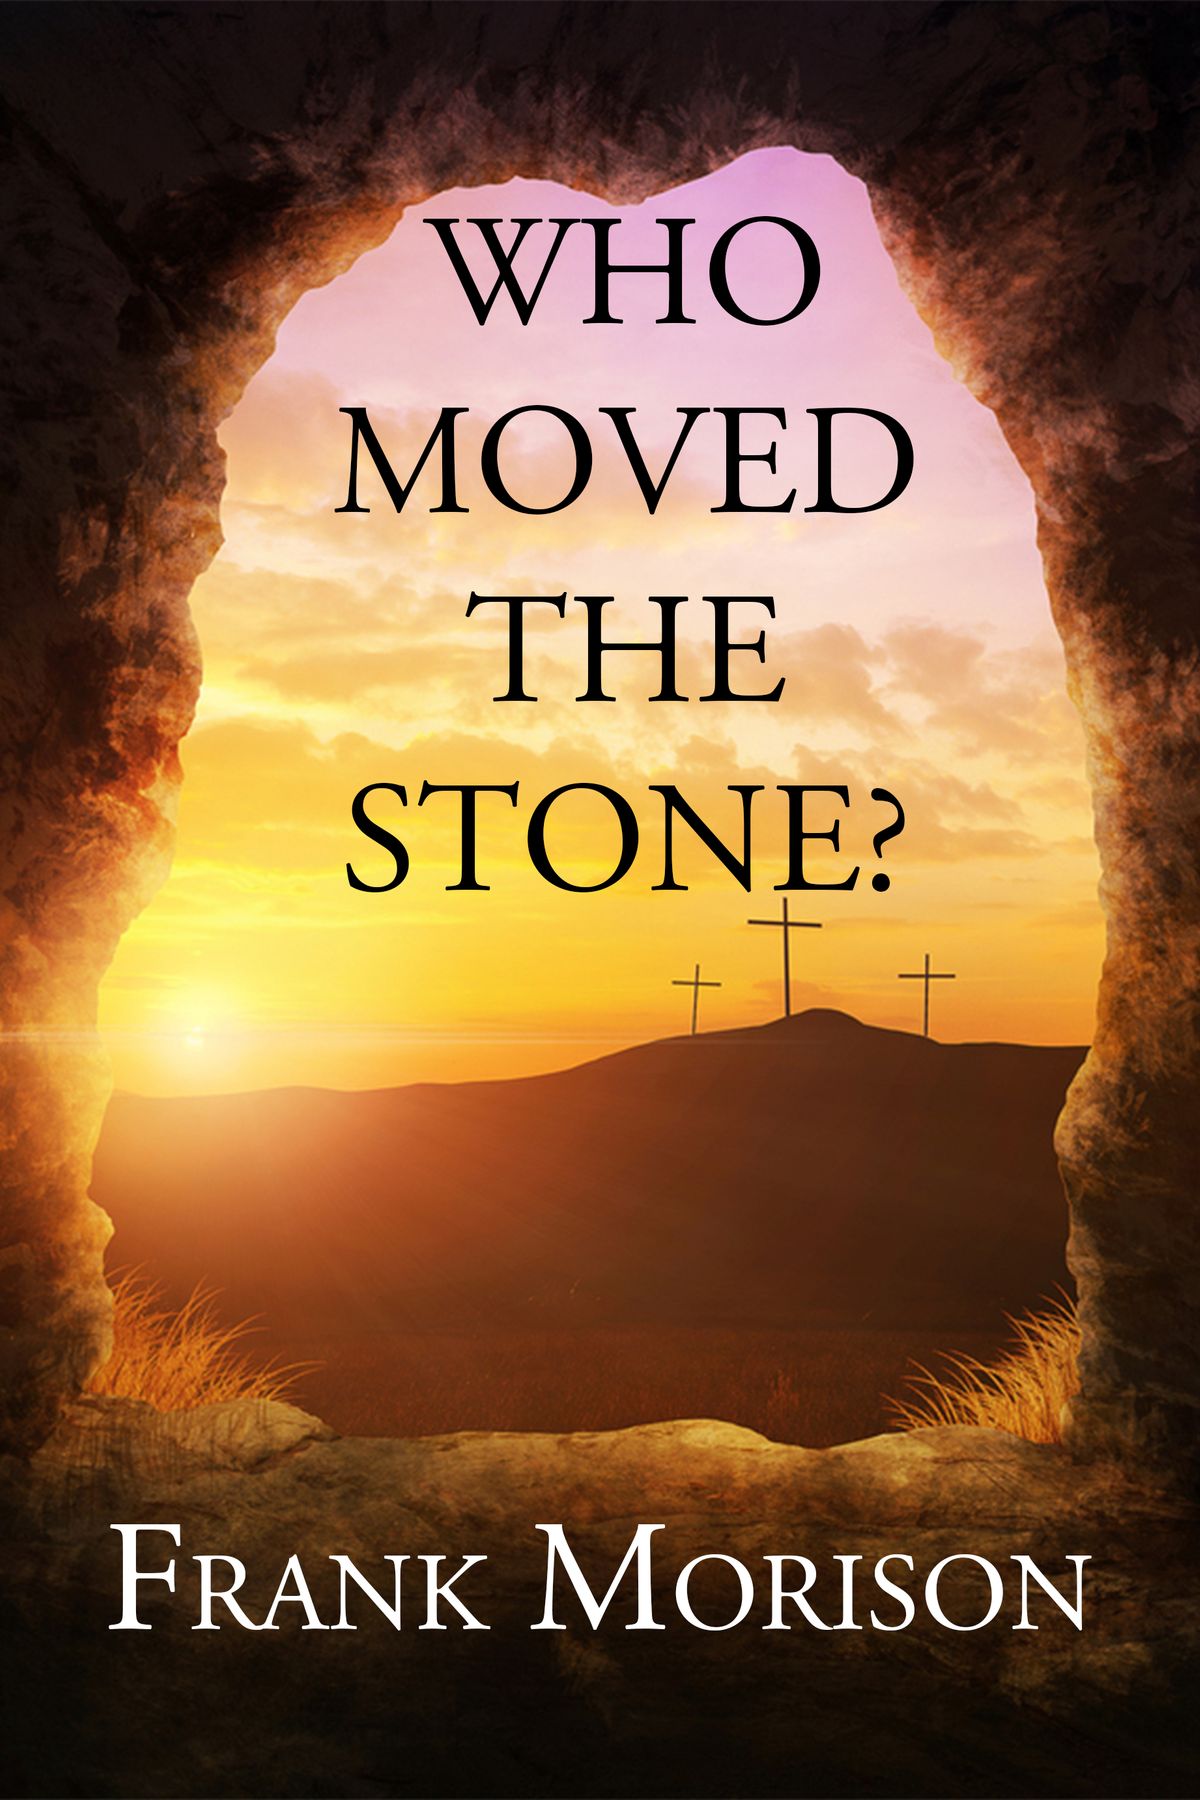 WHO MOVED THE STONE?